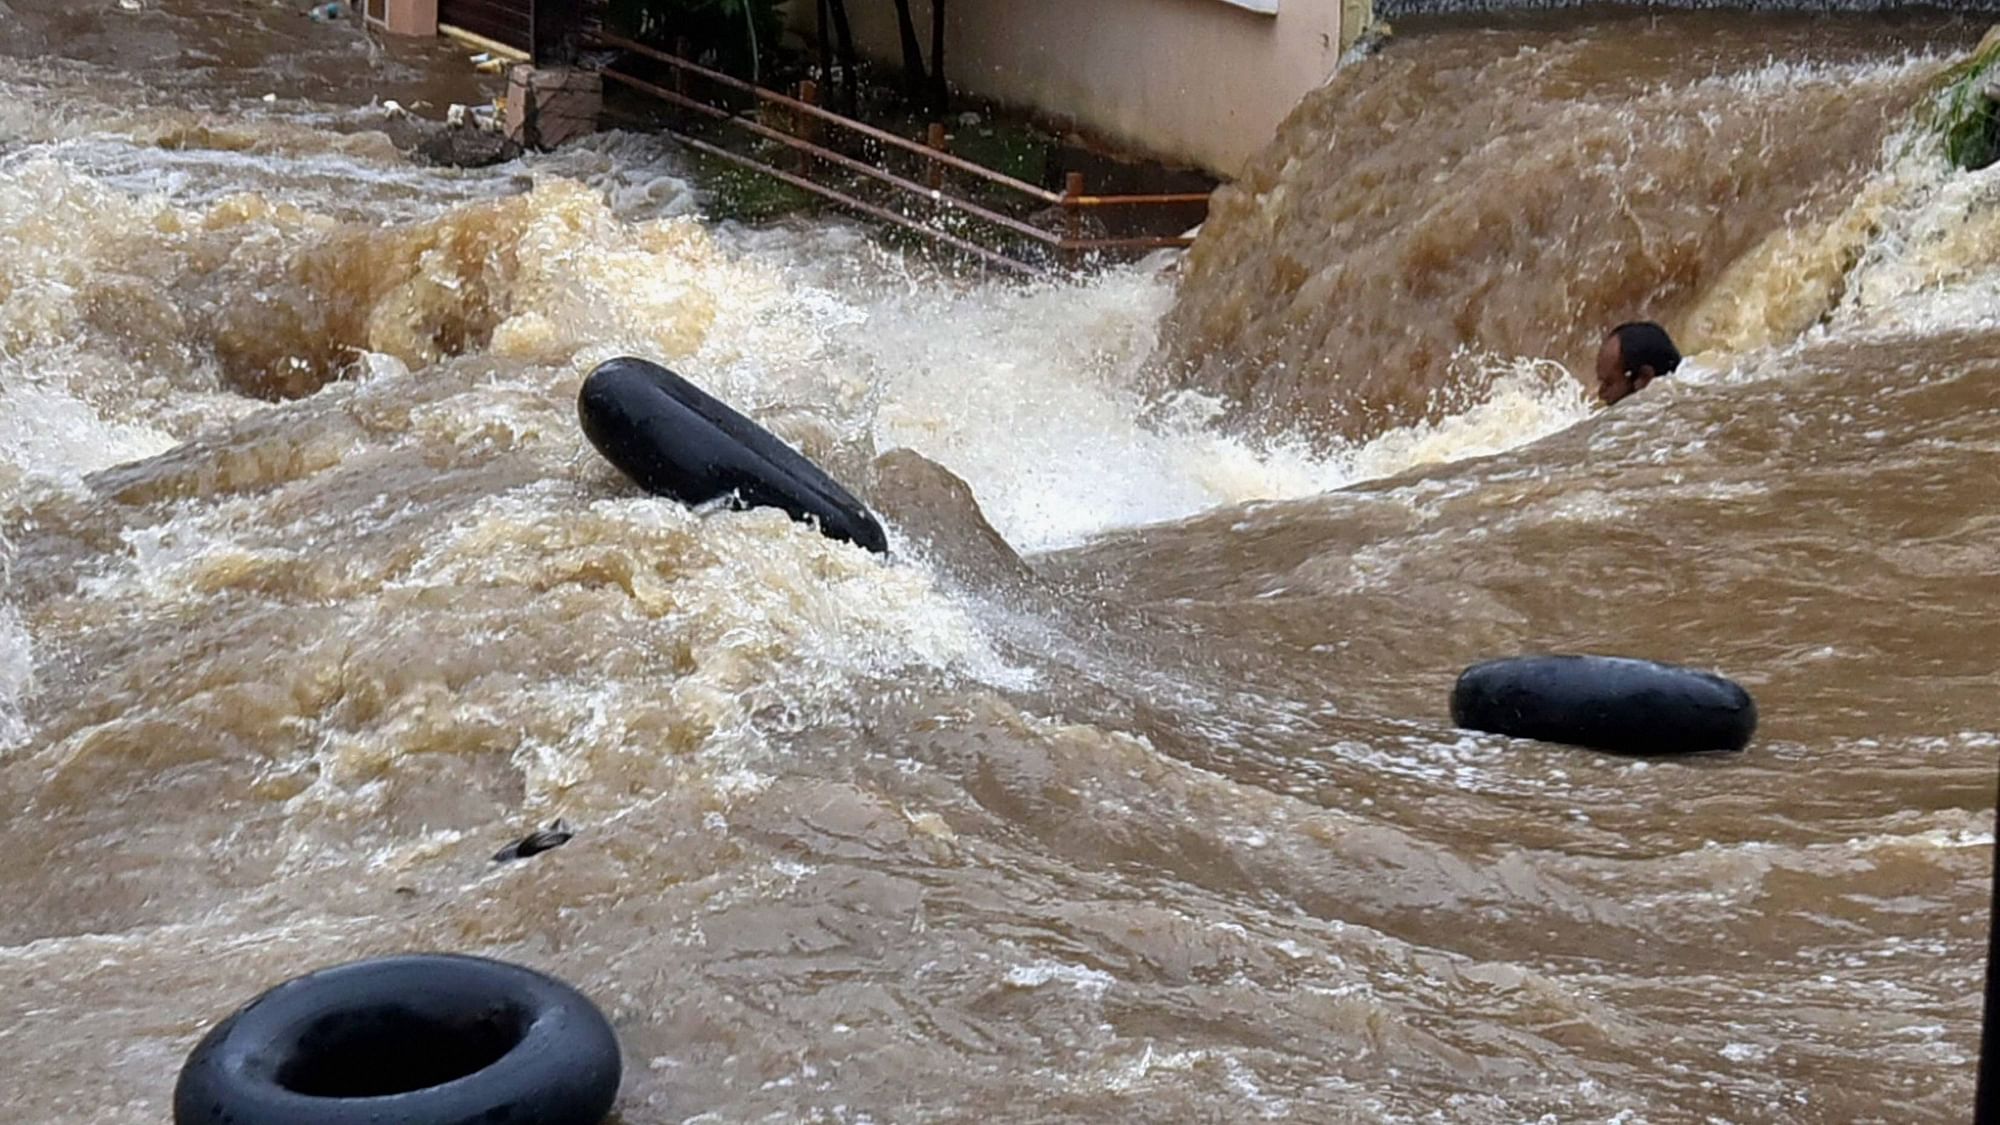 A man swept away by floodwater in Hyderabad on Tuesday, 13 October,&nbsp;